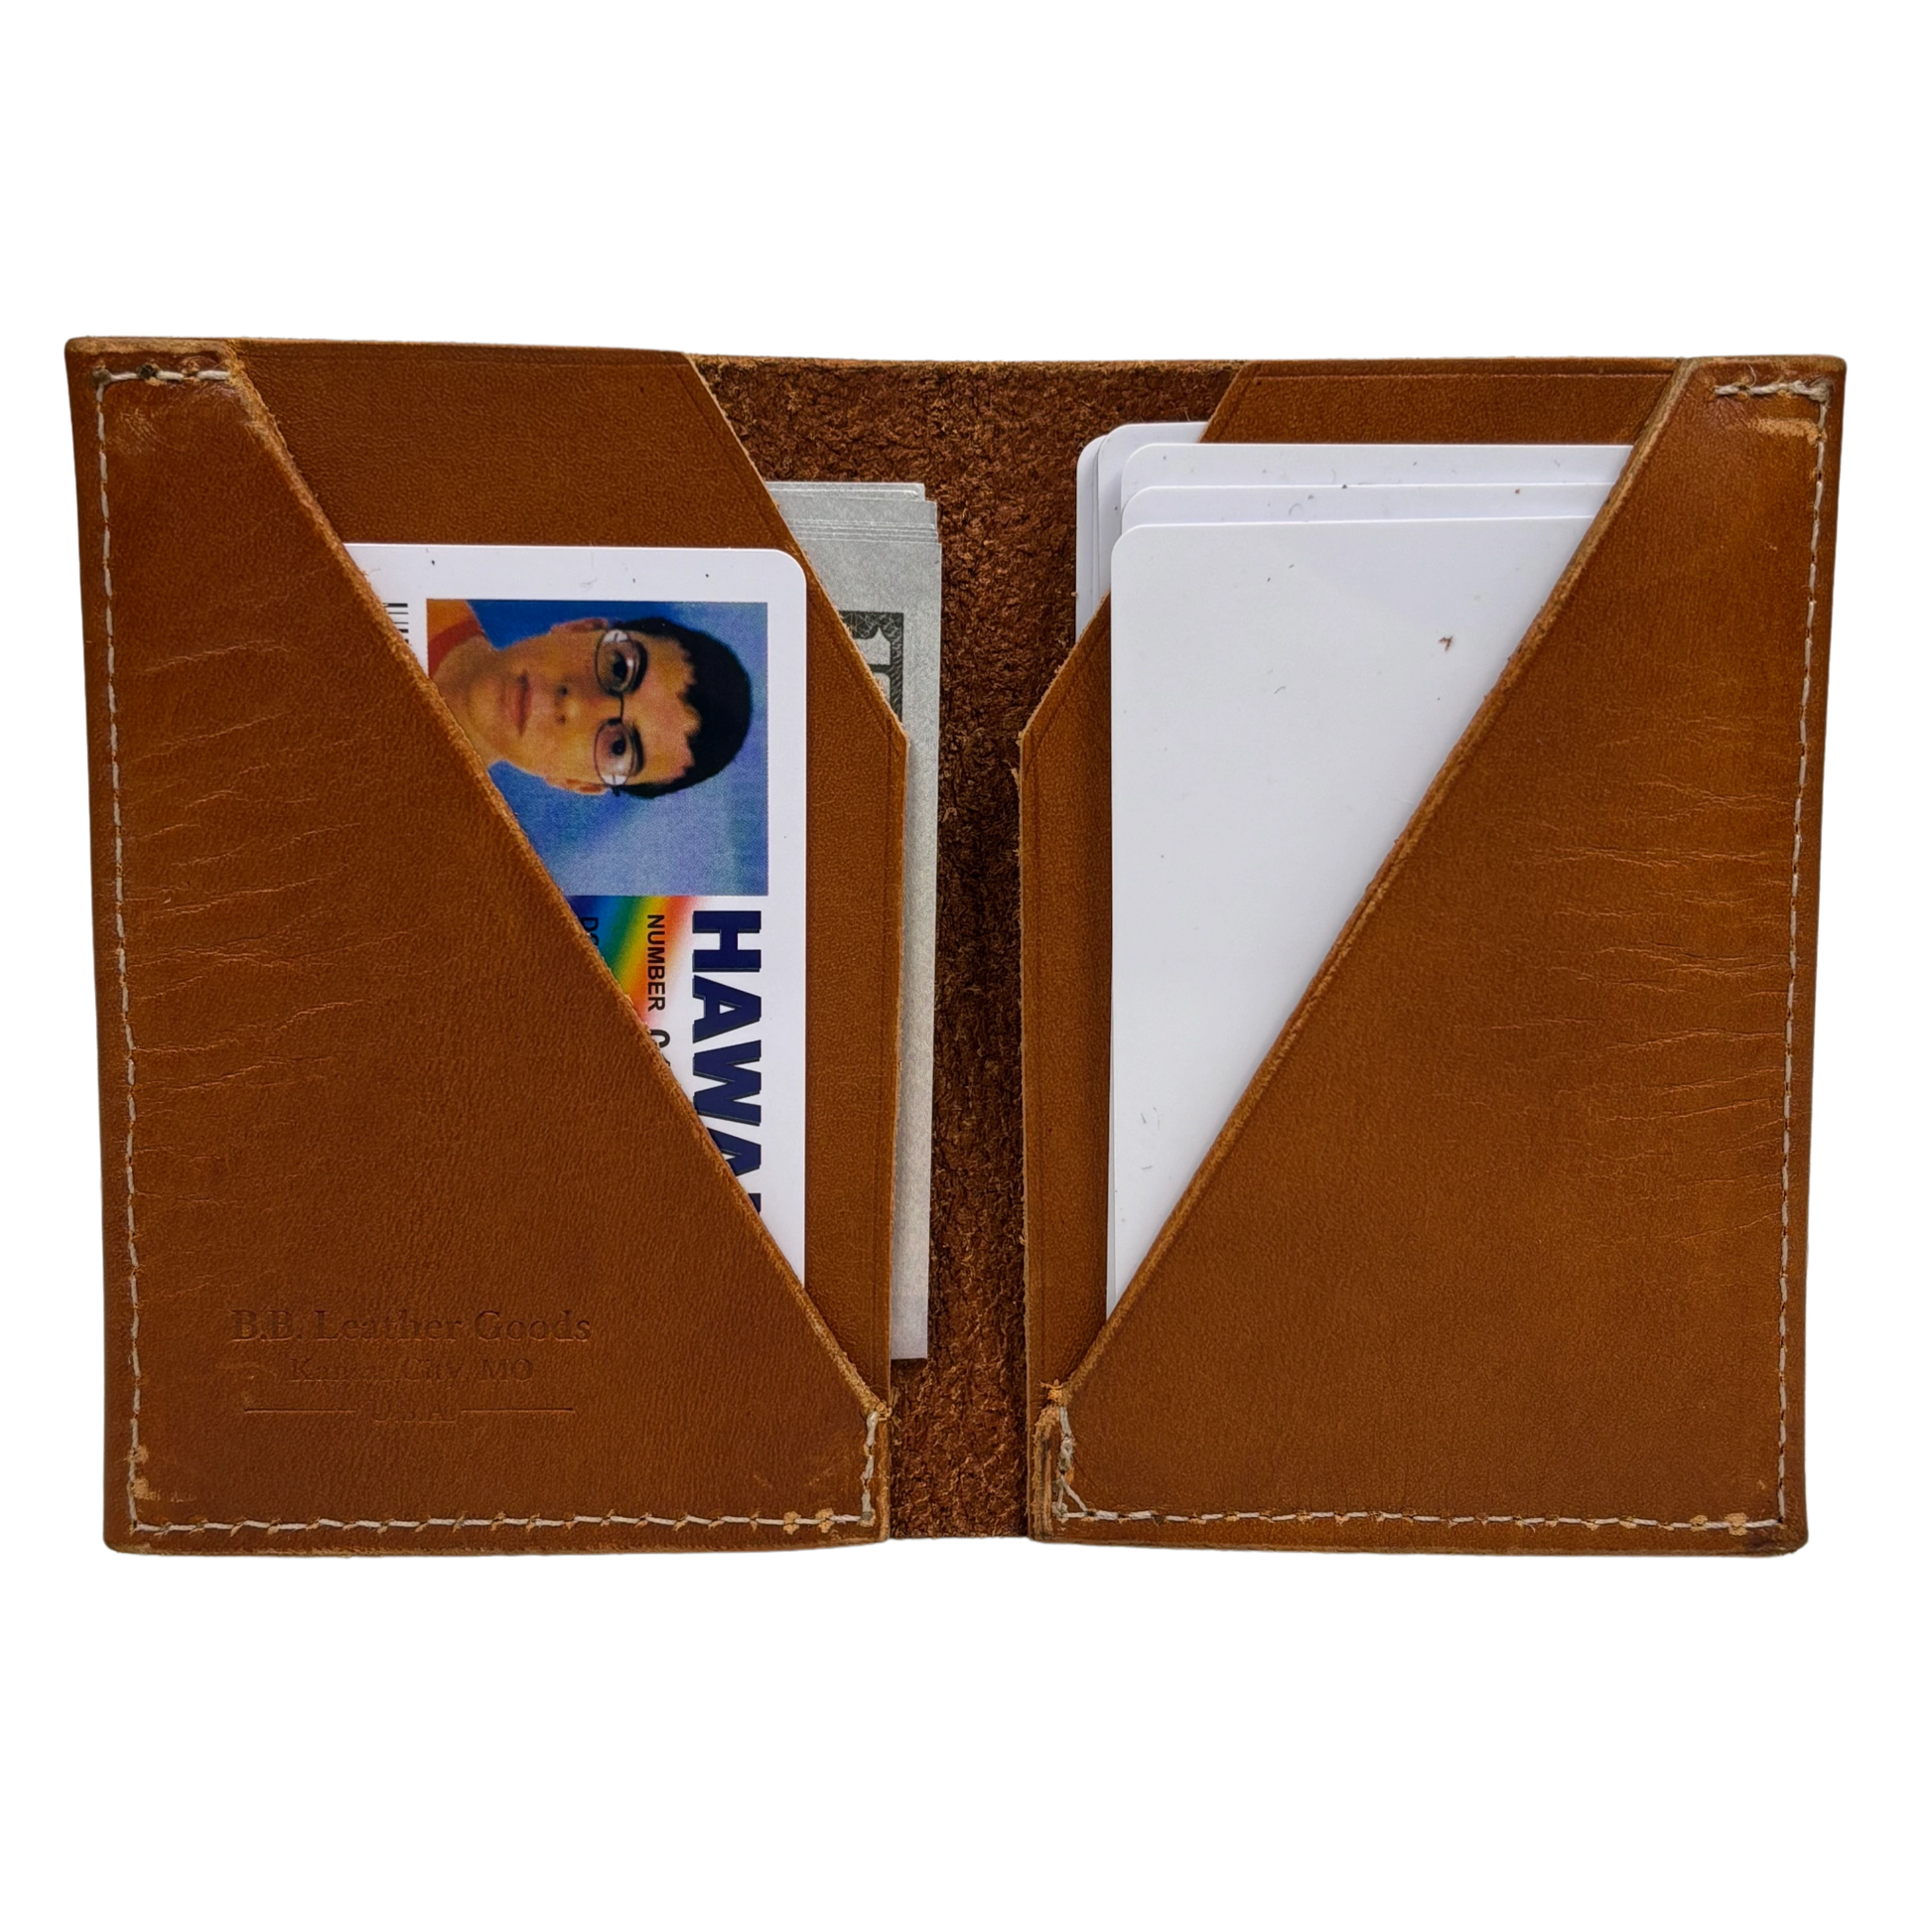 Tan Bridle Leather Card Wallet - BB Leather Goods